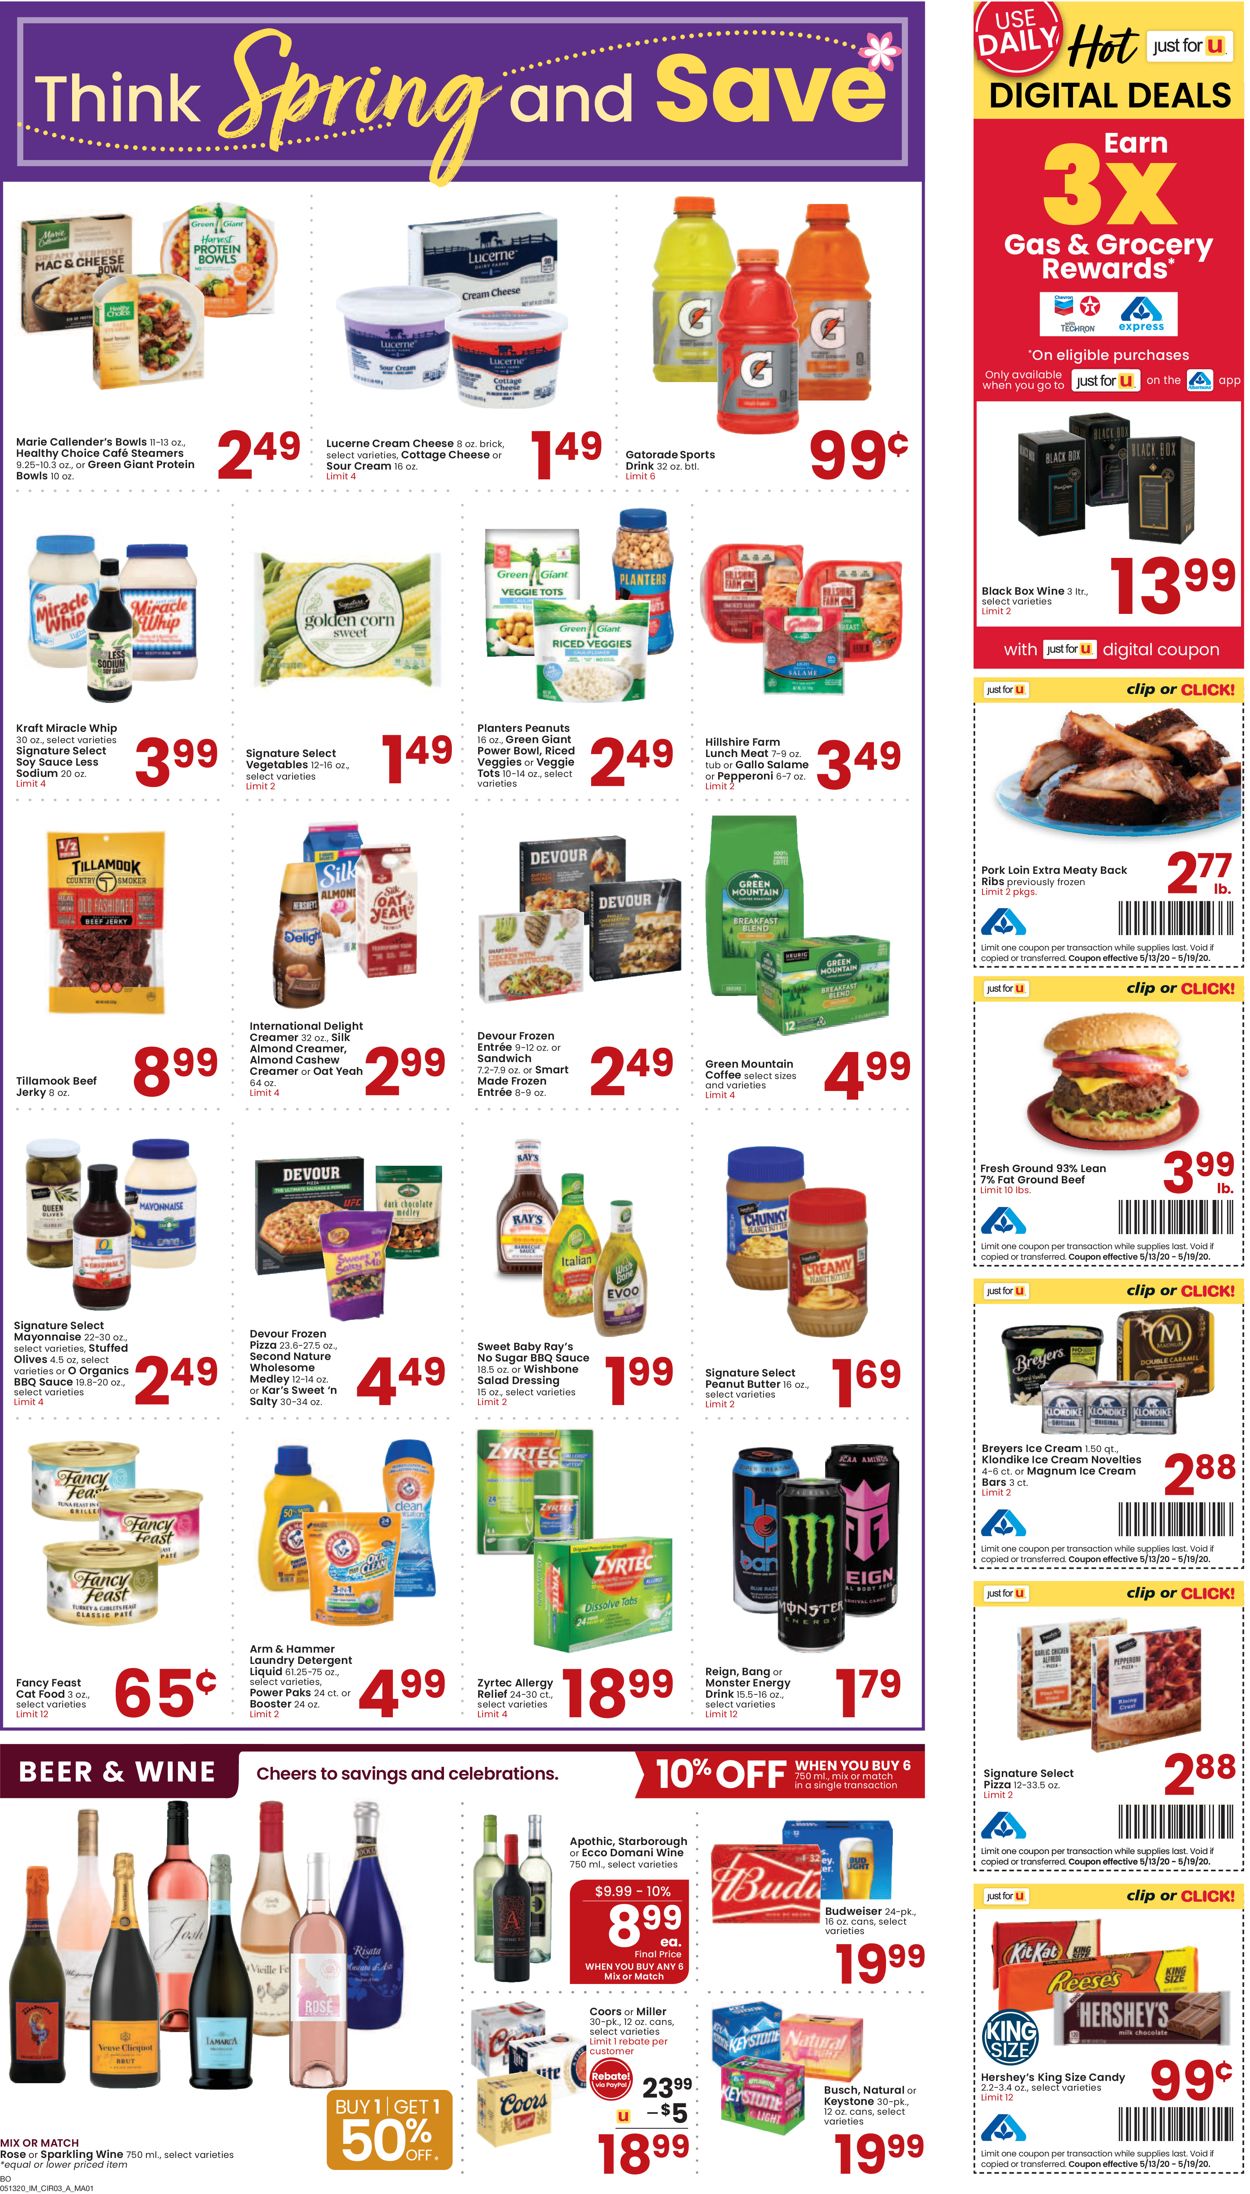 Catalogue Albertsons from 05/13/2020